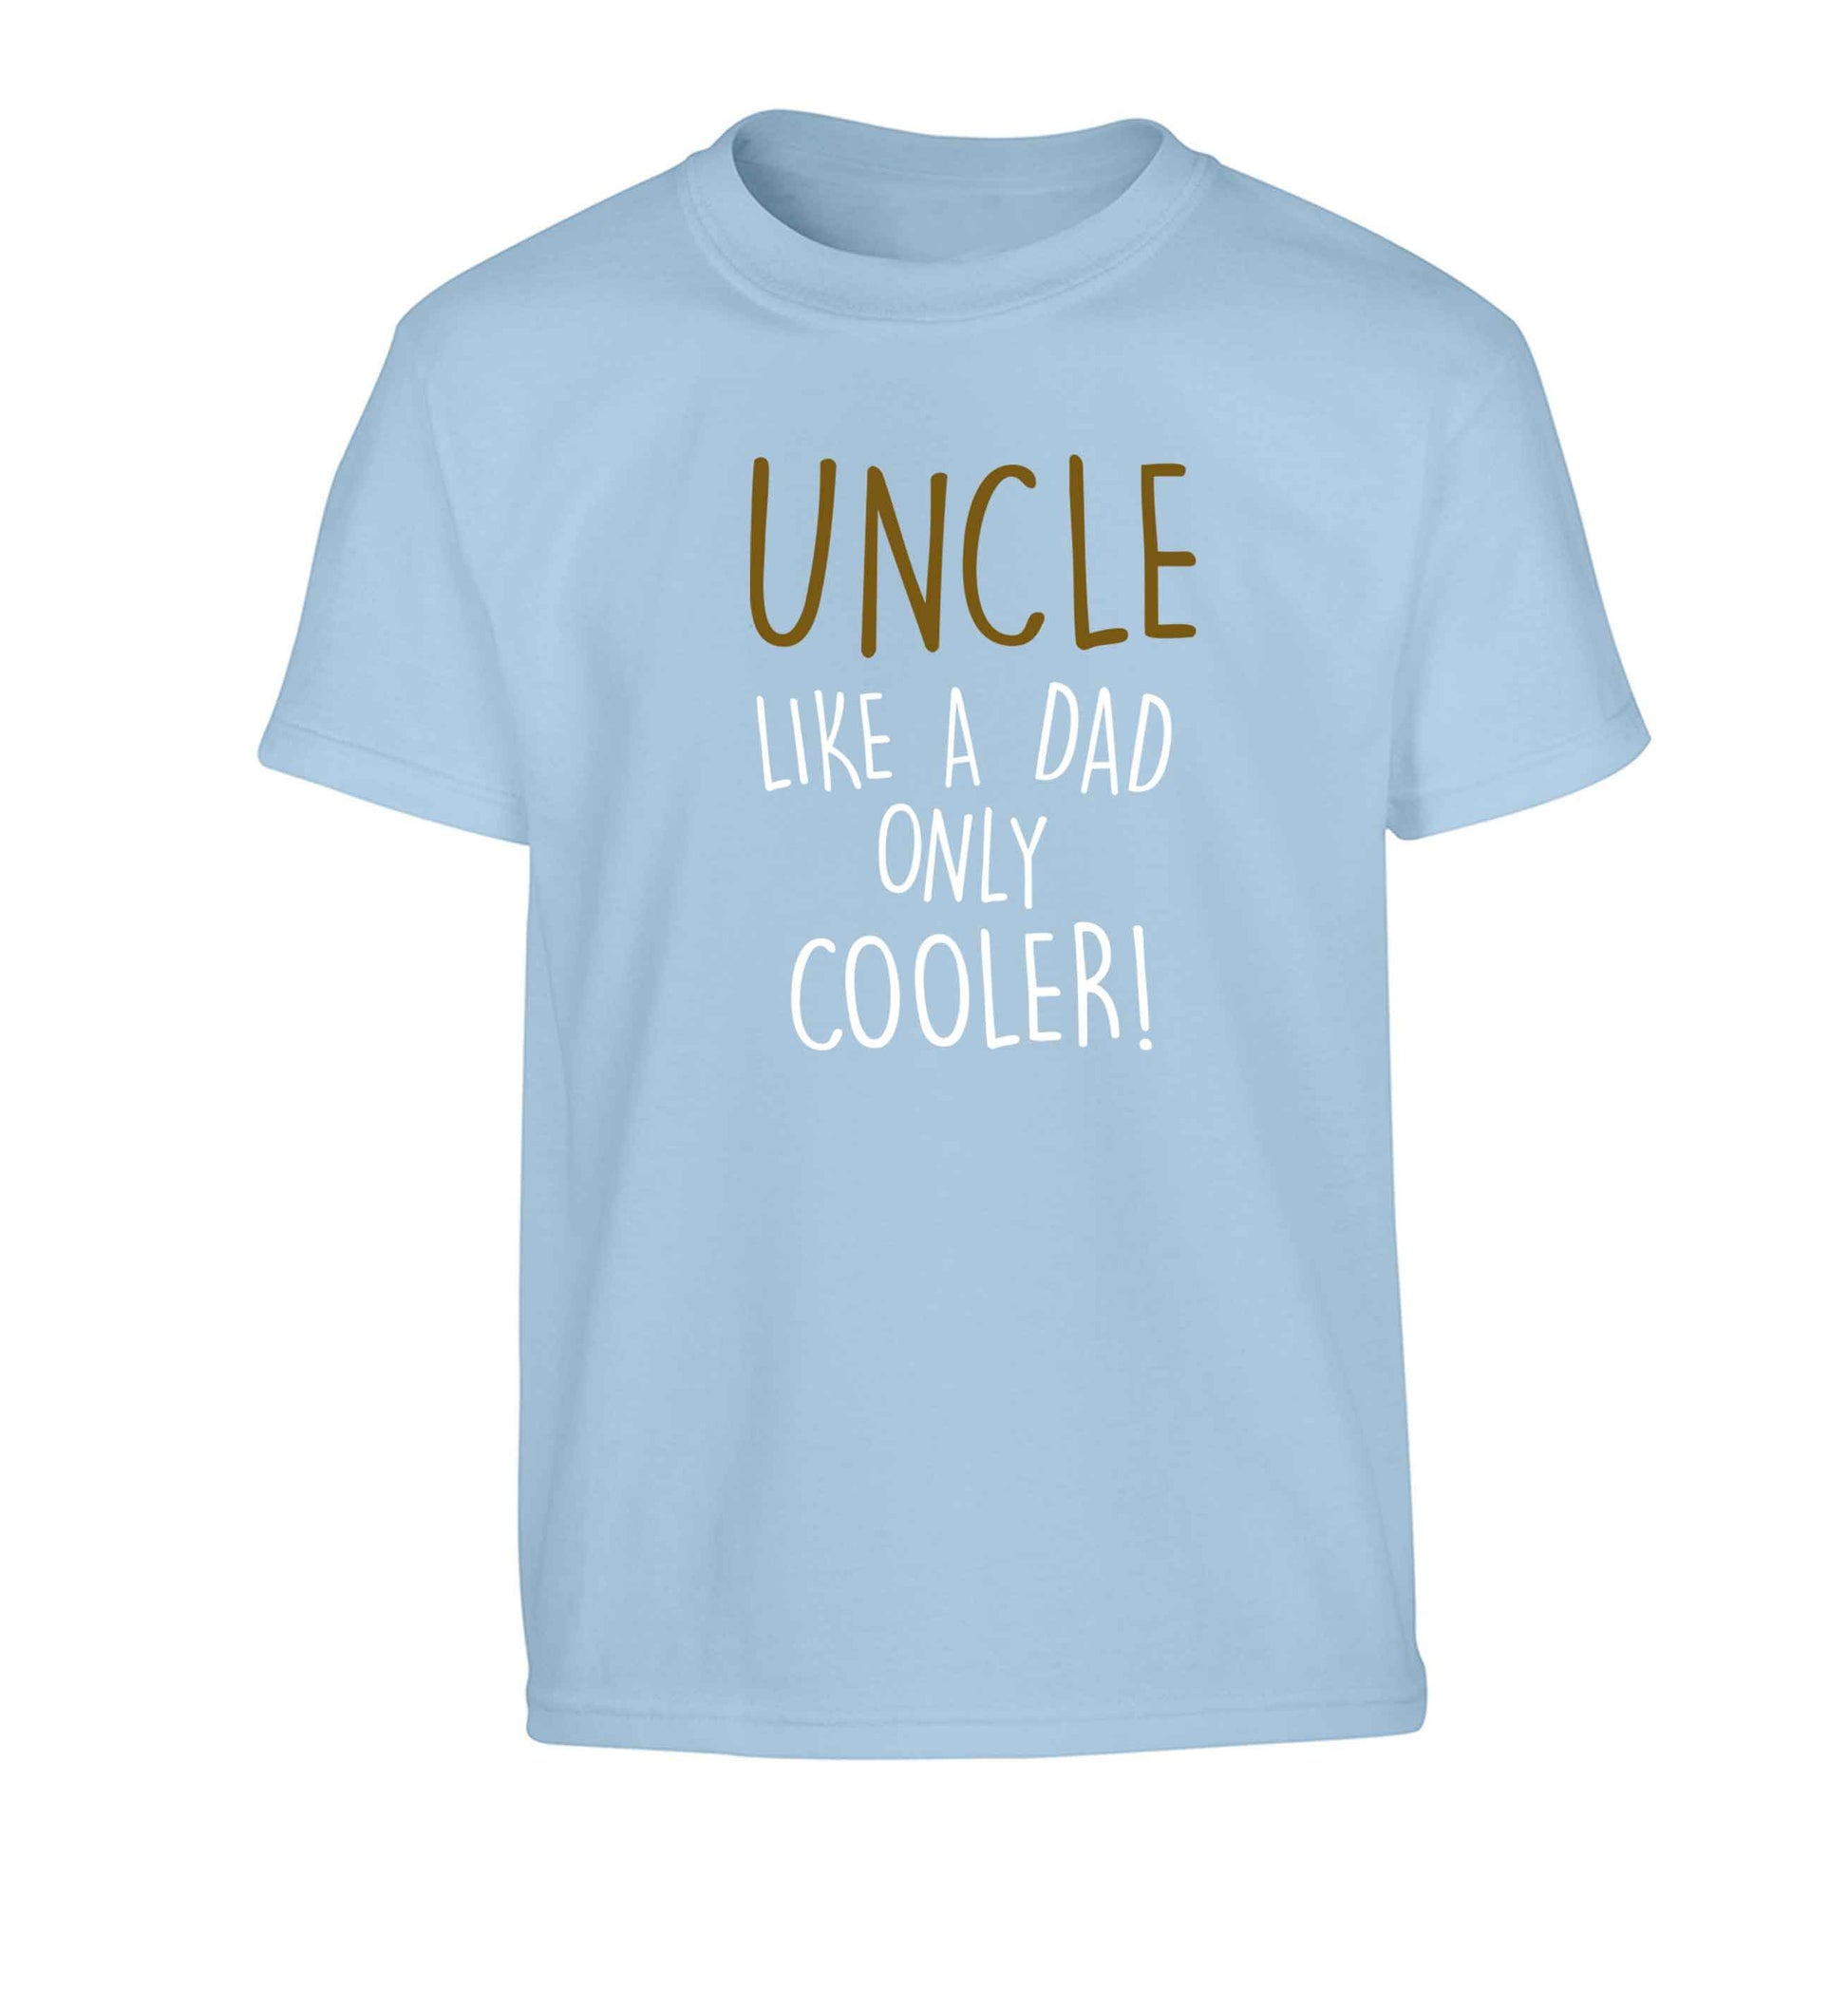 Uncle like a dad only cooler Children's light blue Tshirt 12-13 Years